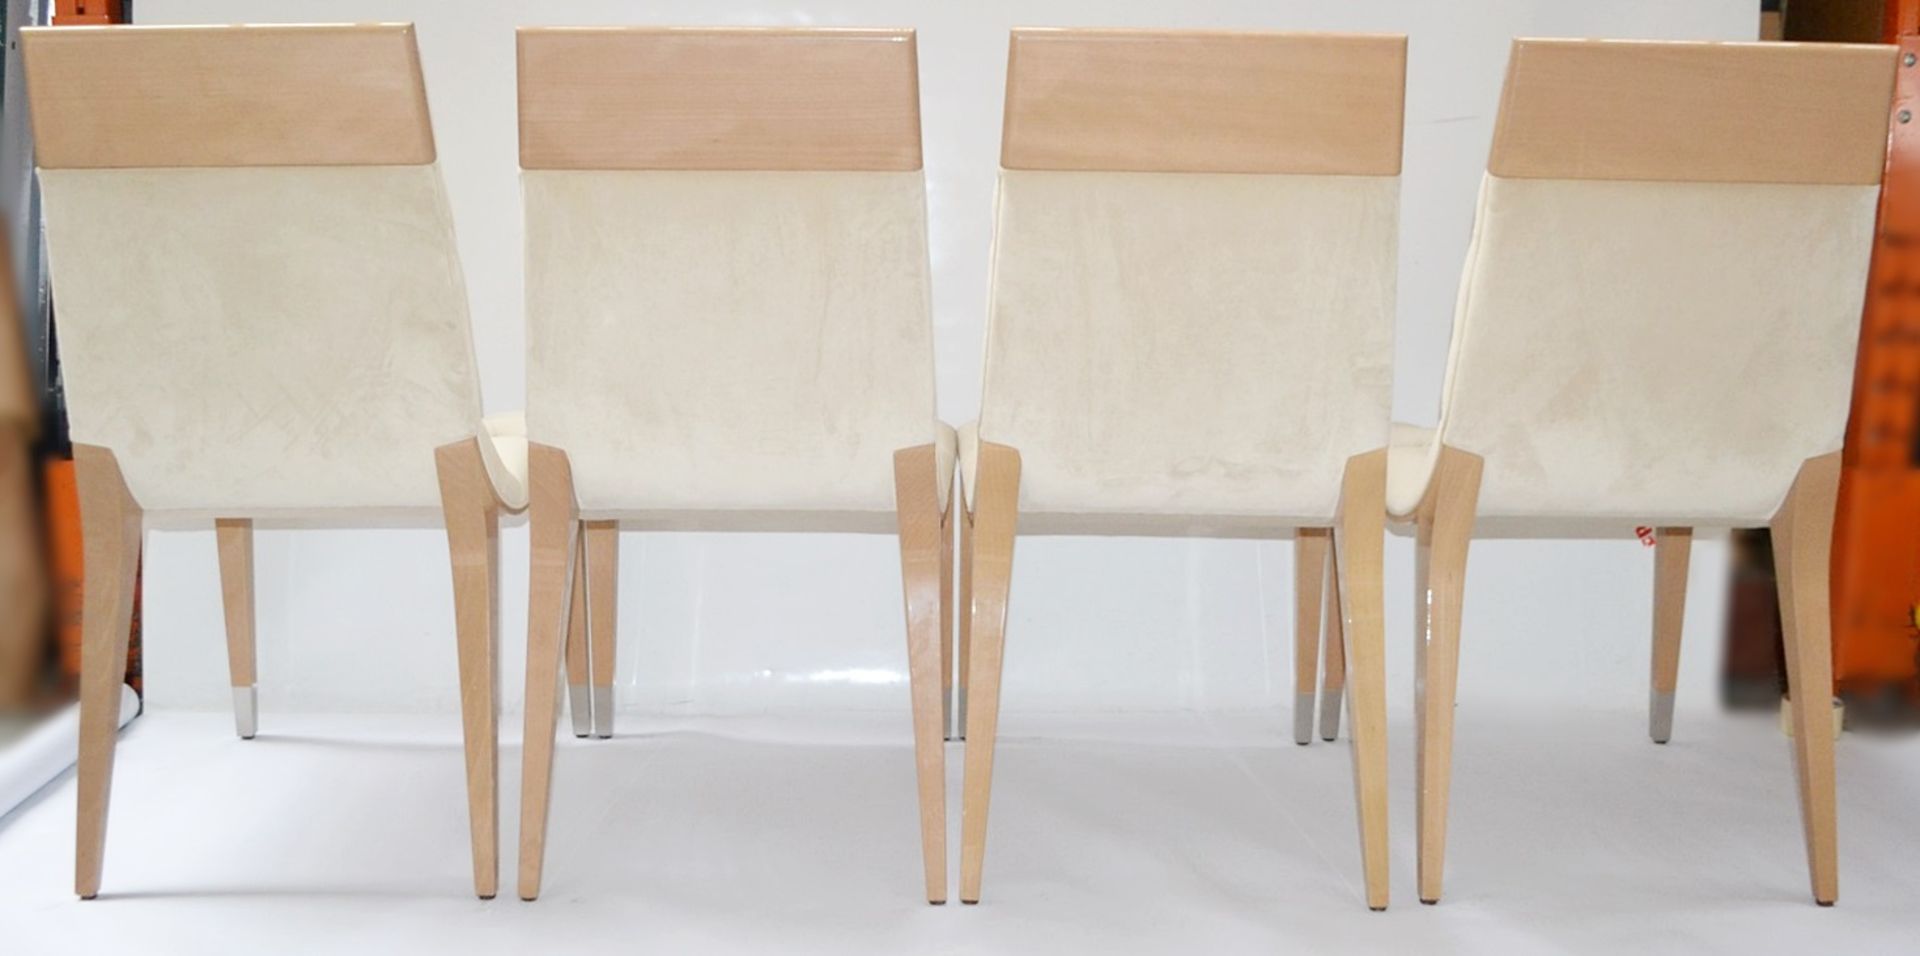 4 x GIORGIO COLLECTION 'Sunrise' Italian Designer Dining Chairs - Pre-owned In Good Condition - Image 4 of 14